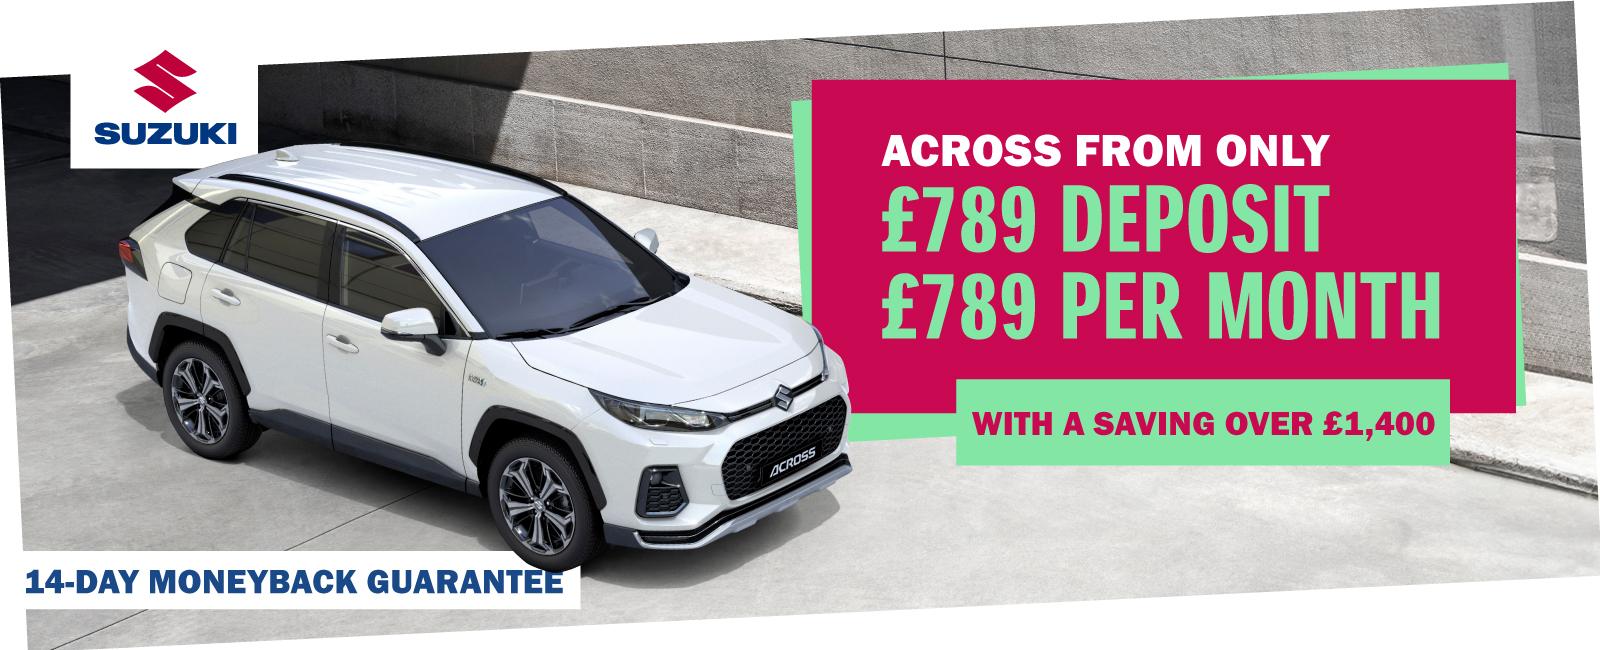 The Suzuki ACROSS from only £789 deposit, £789 per month